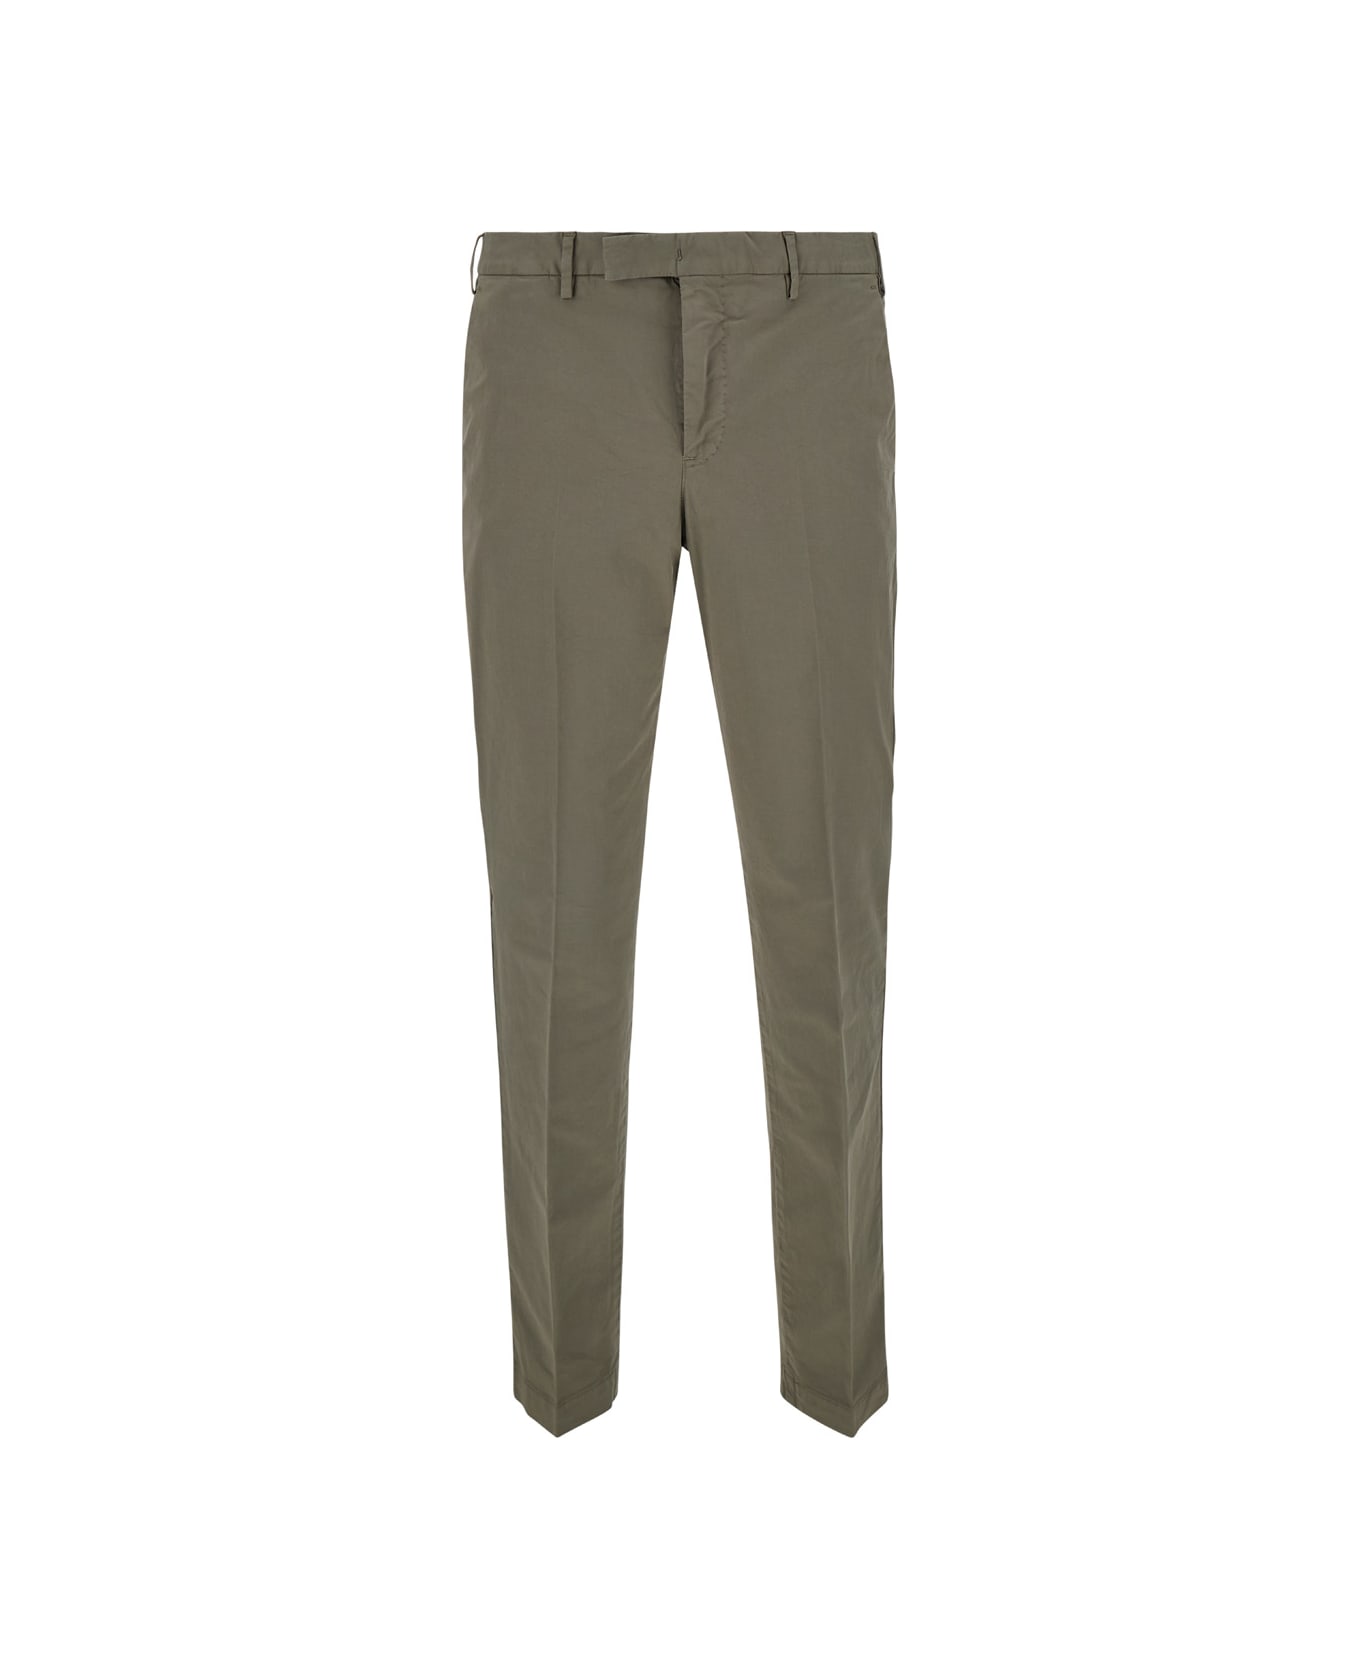 PT01 Sartorial Slim Fit Grey Trousers In Cotton Blend Man - Grey ボトムス